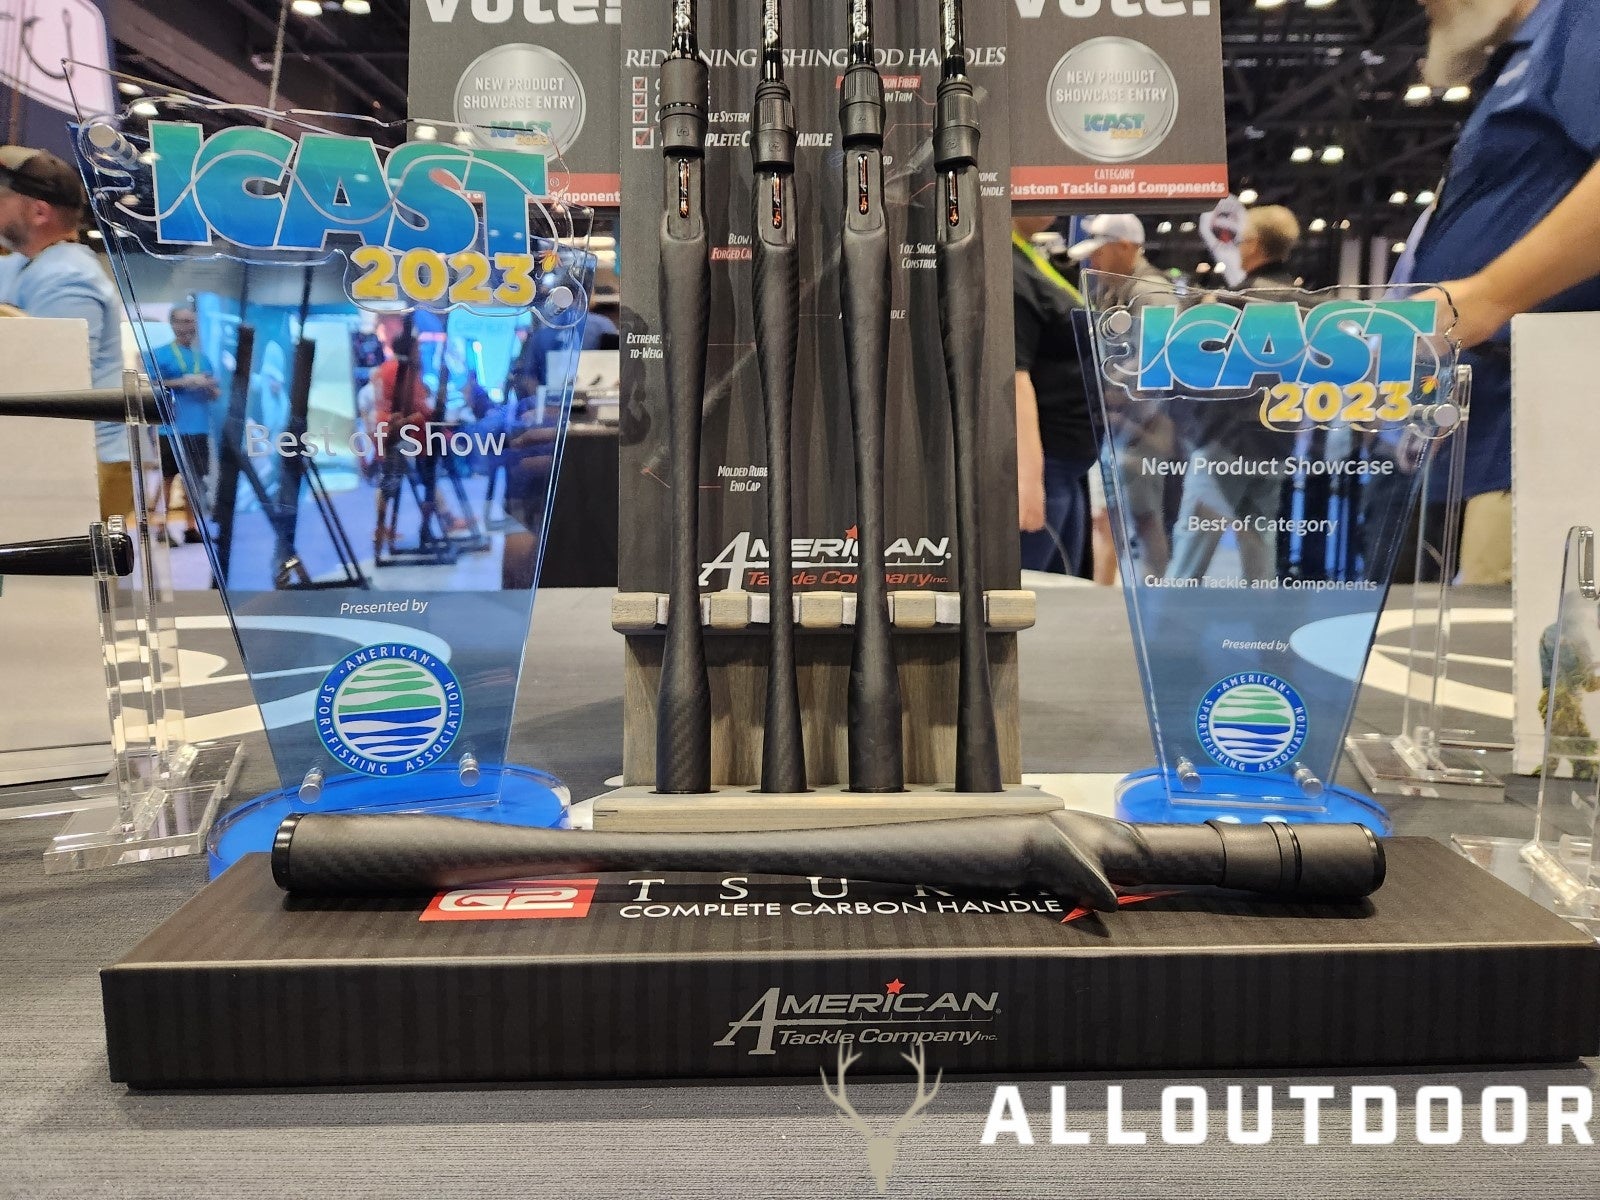 ICAST 2023: New Product Showcase – Angler Gear